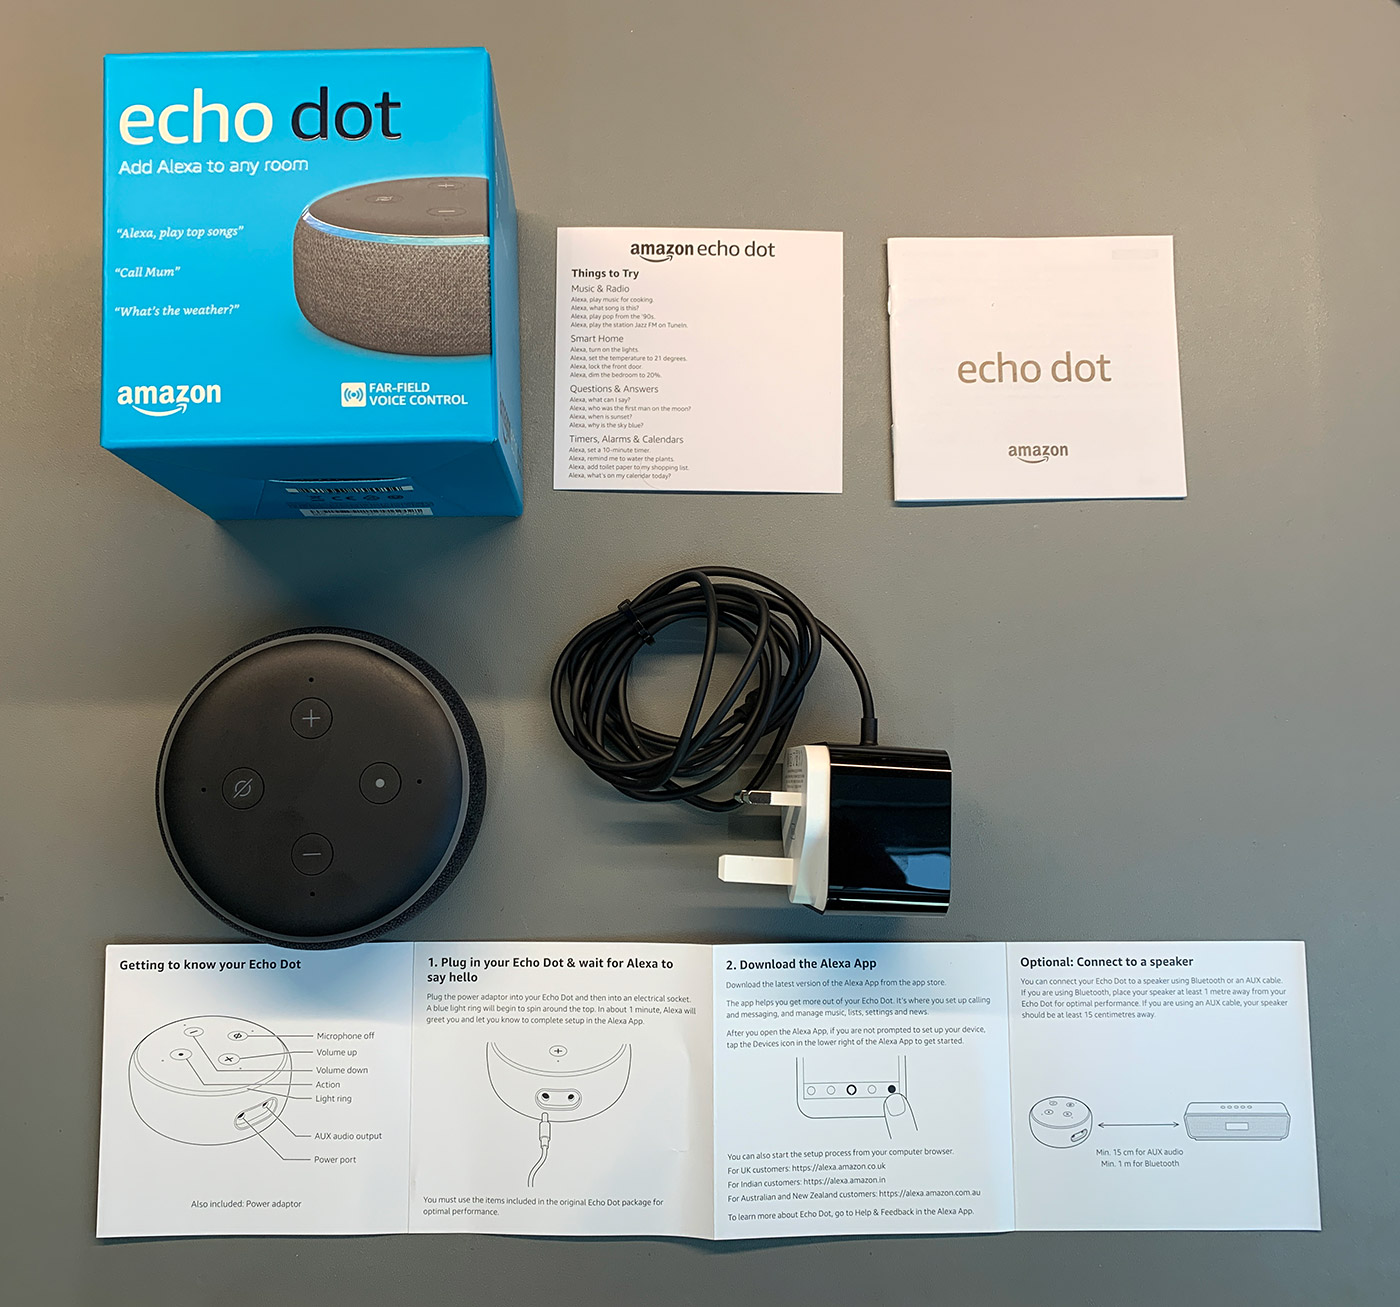 Echo Dot 3rd Generation: A Detailed step-by-step Alexa